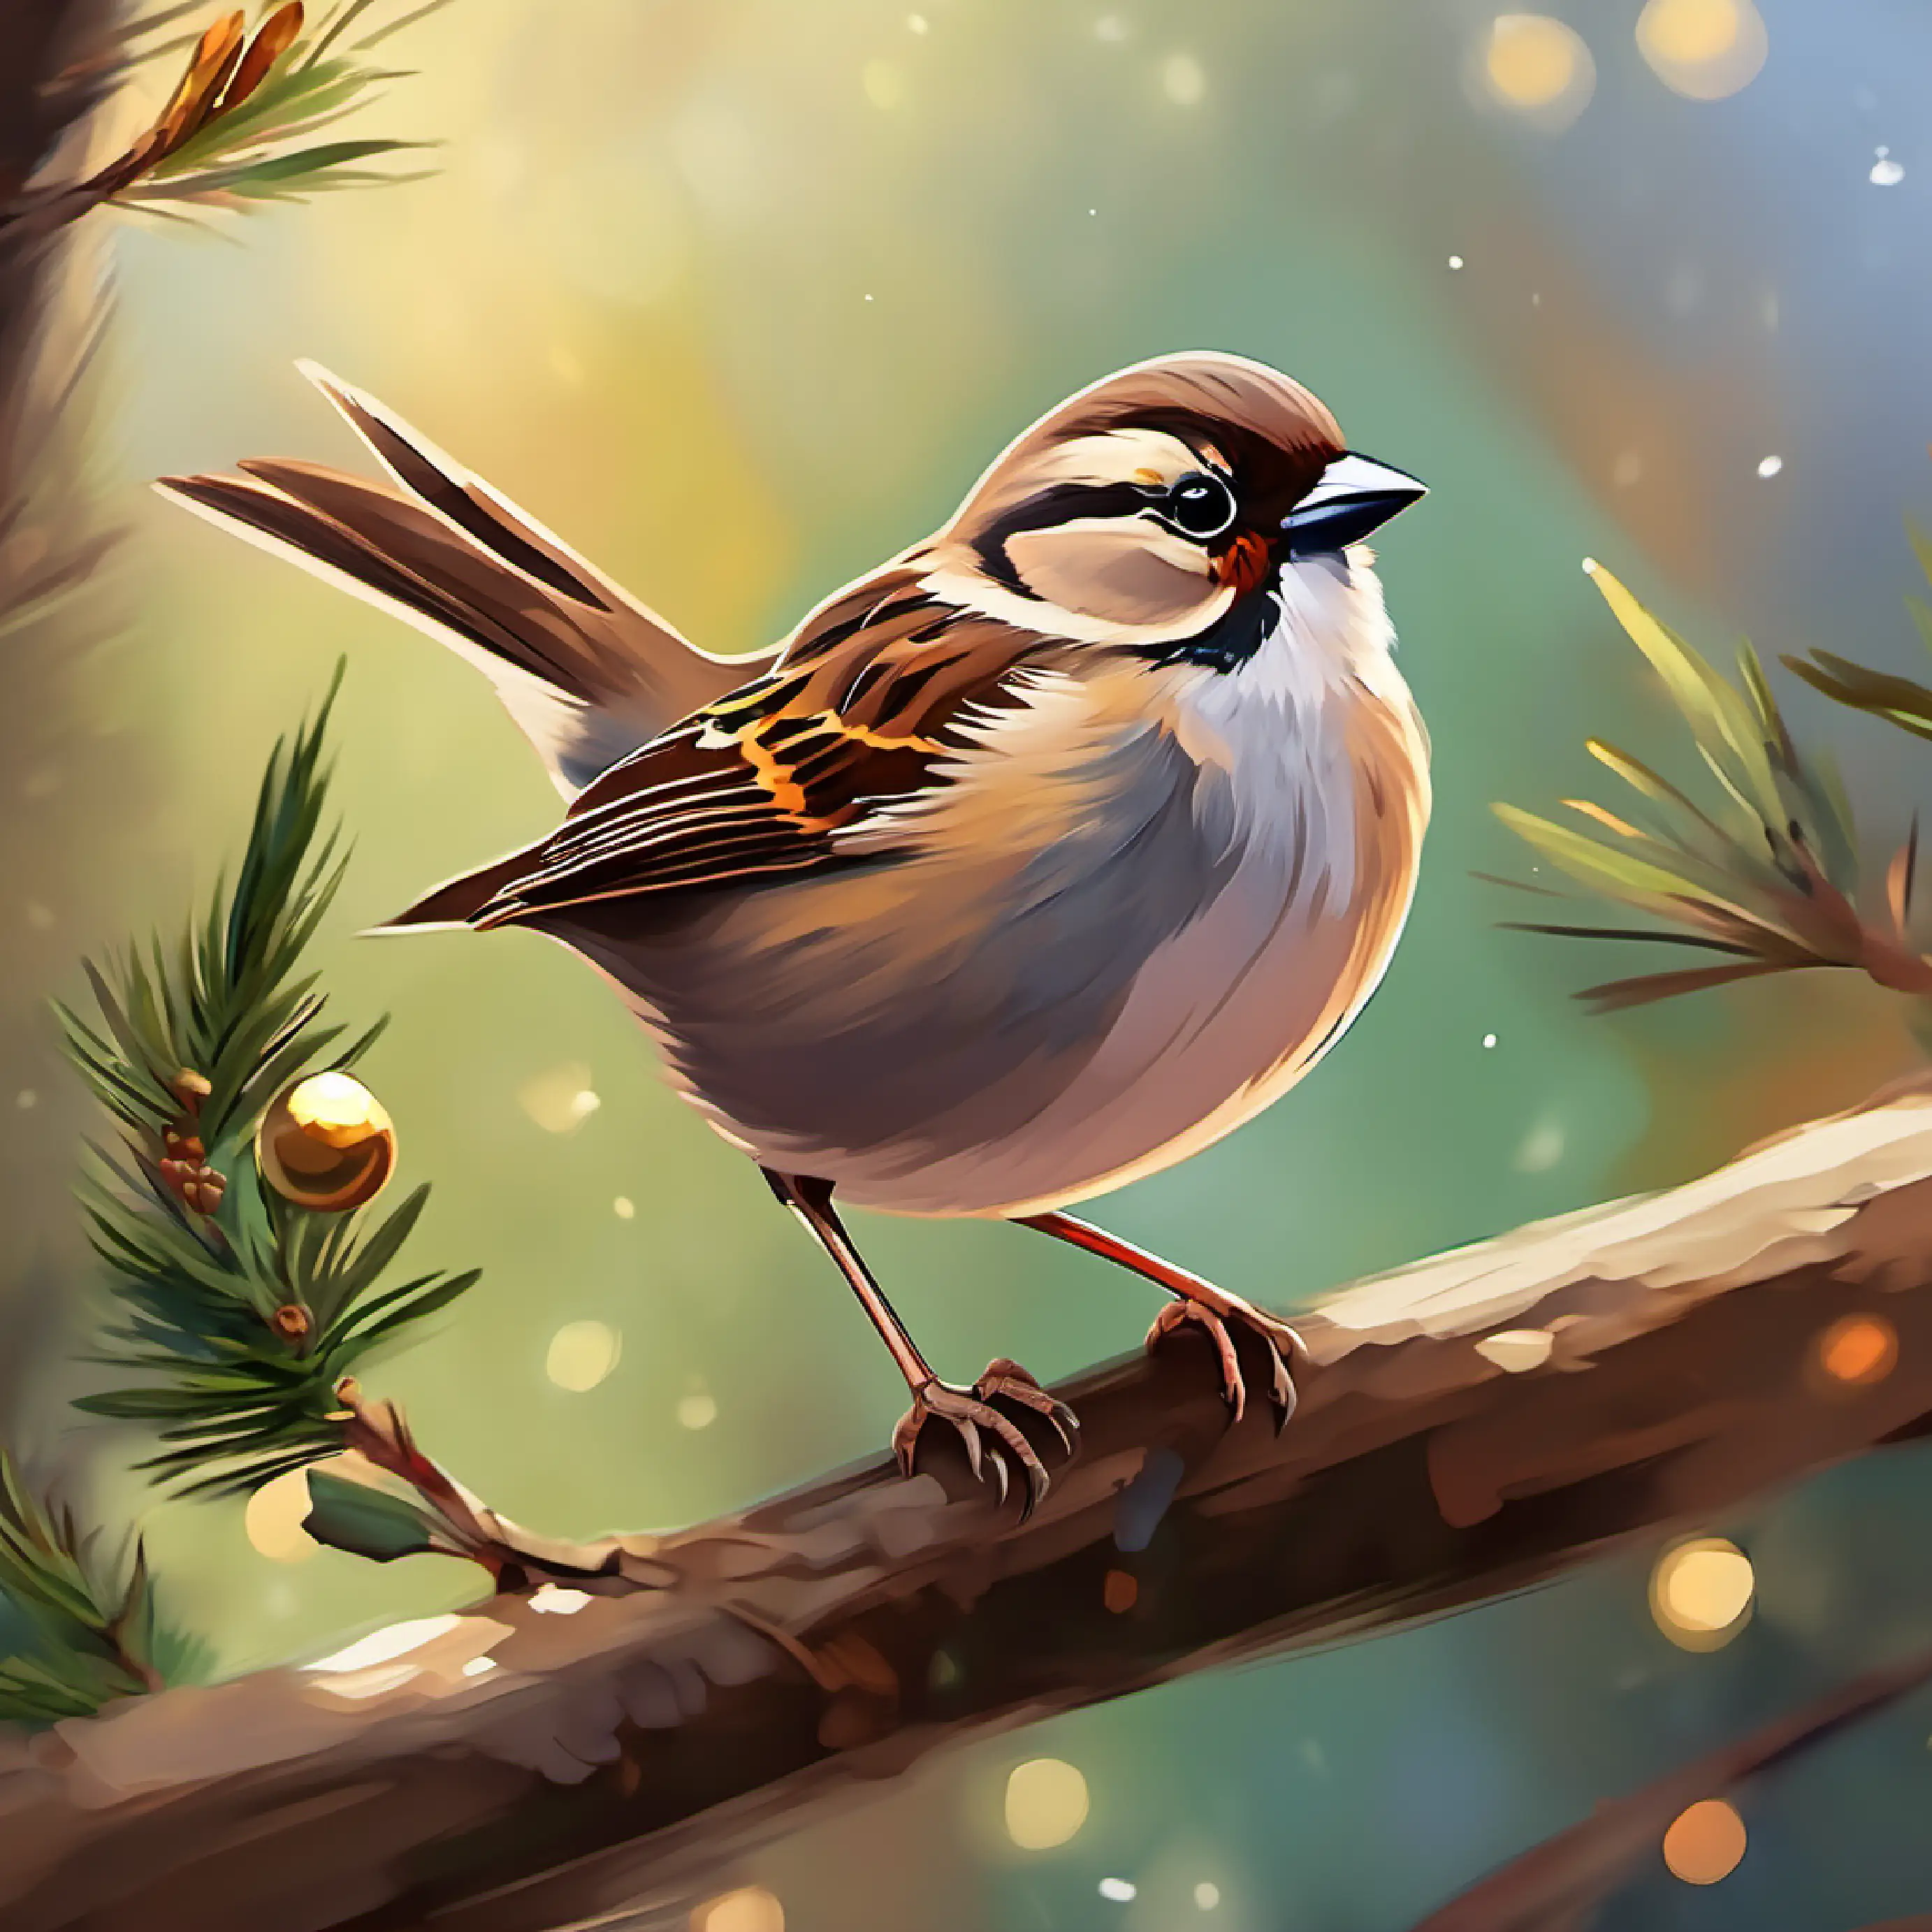 Introducing Small sparrow, brown feathers, bright eyes the sparrow, Meadowfield setting